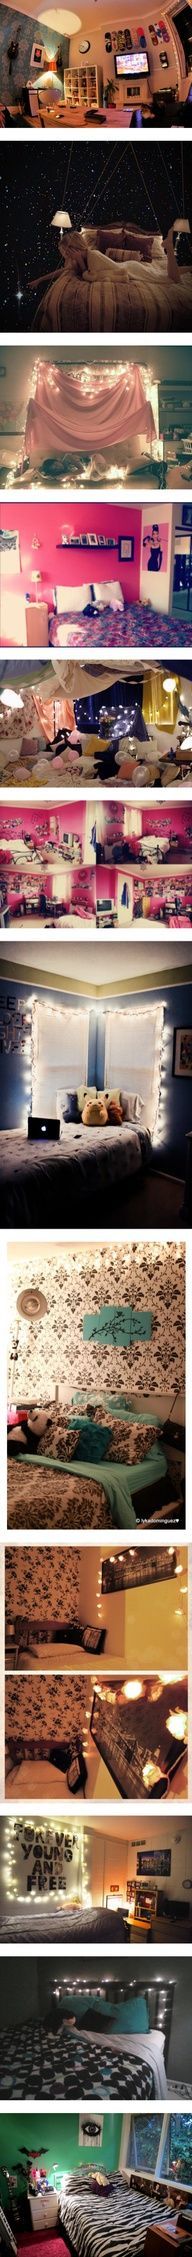 I love the 5th room :)   Bedrooms! :) by ievish on Polyvore  teen hipster tumblr